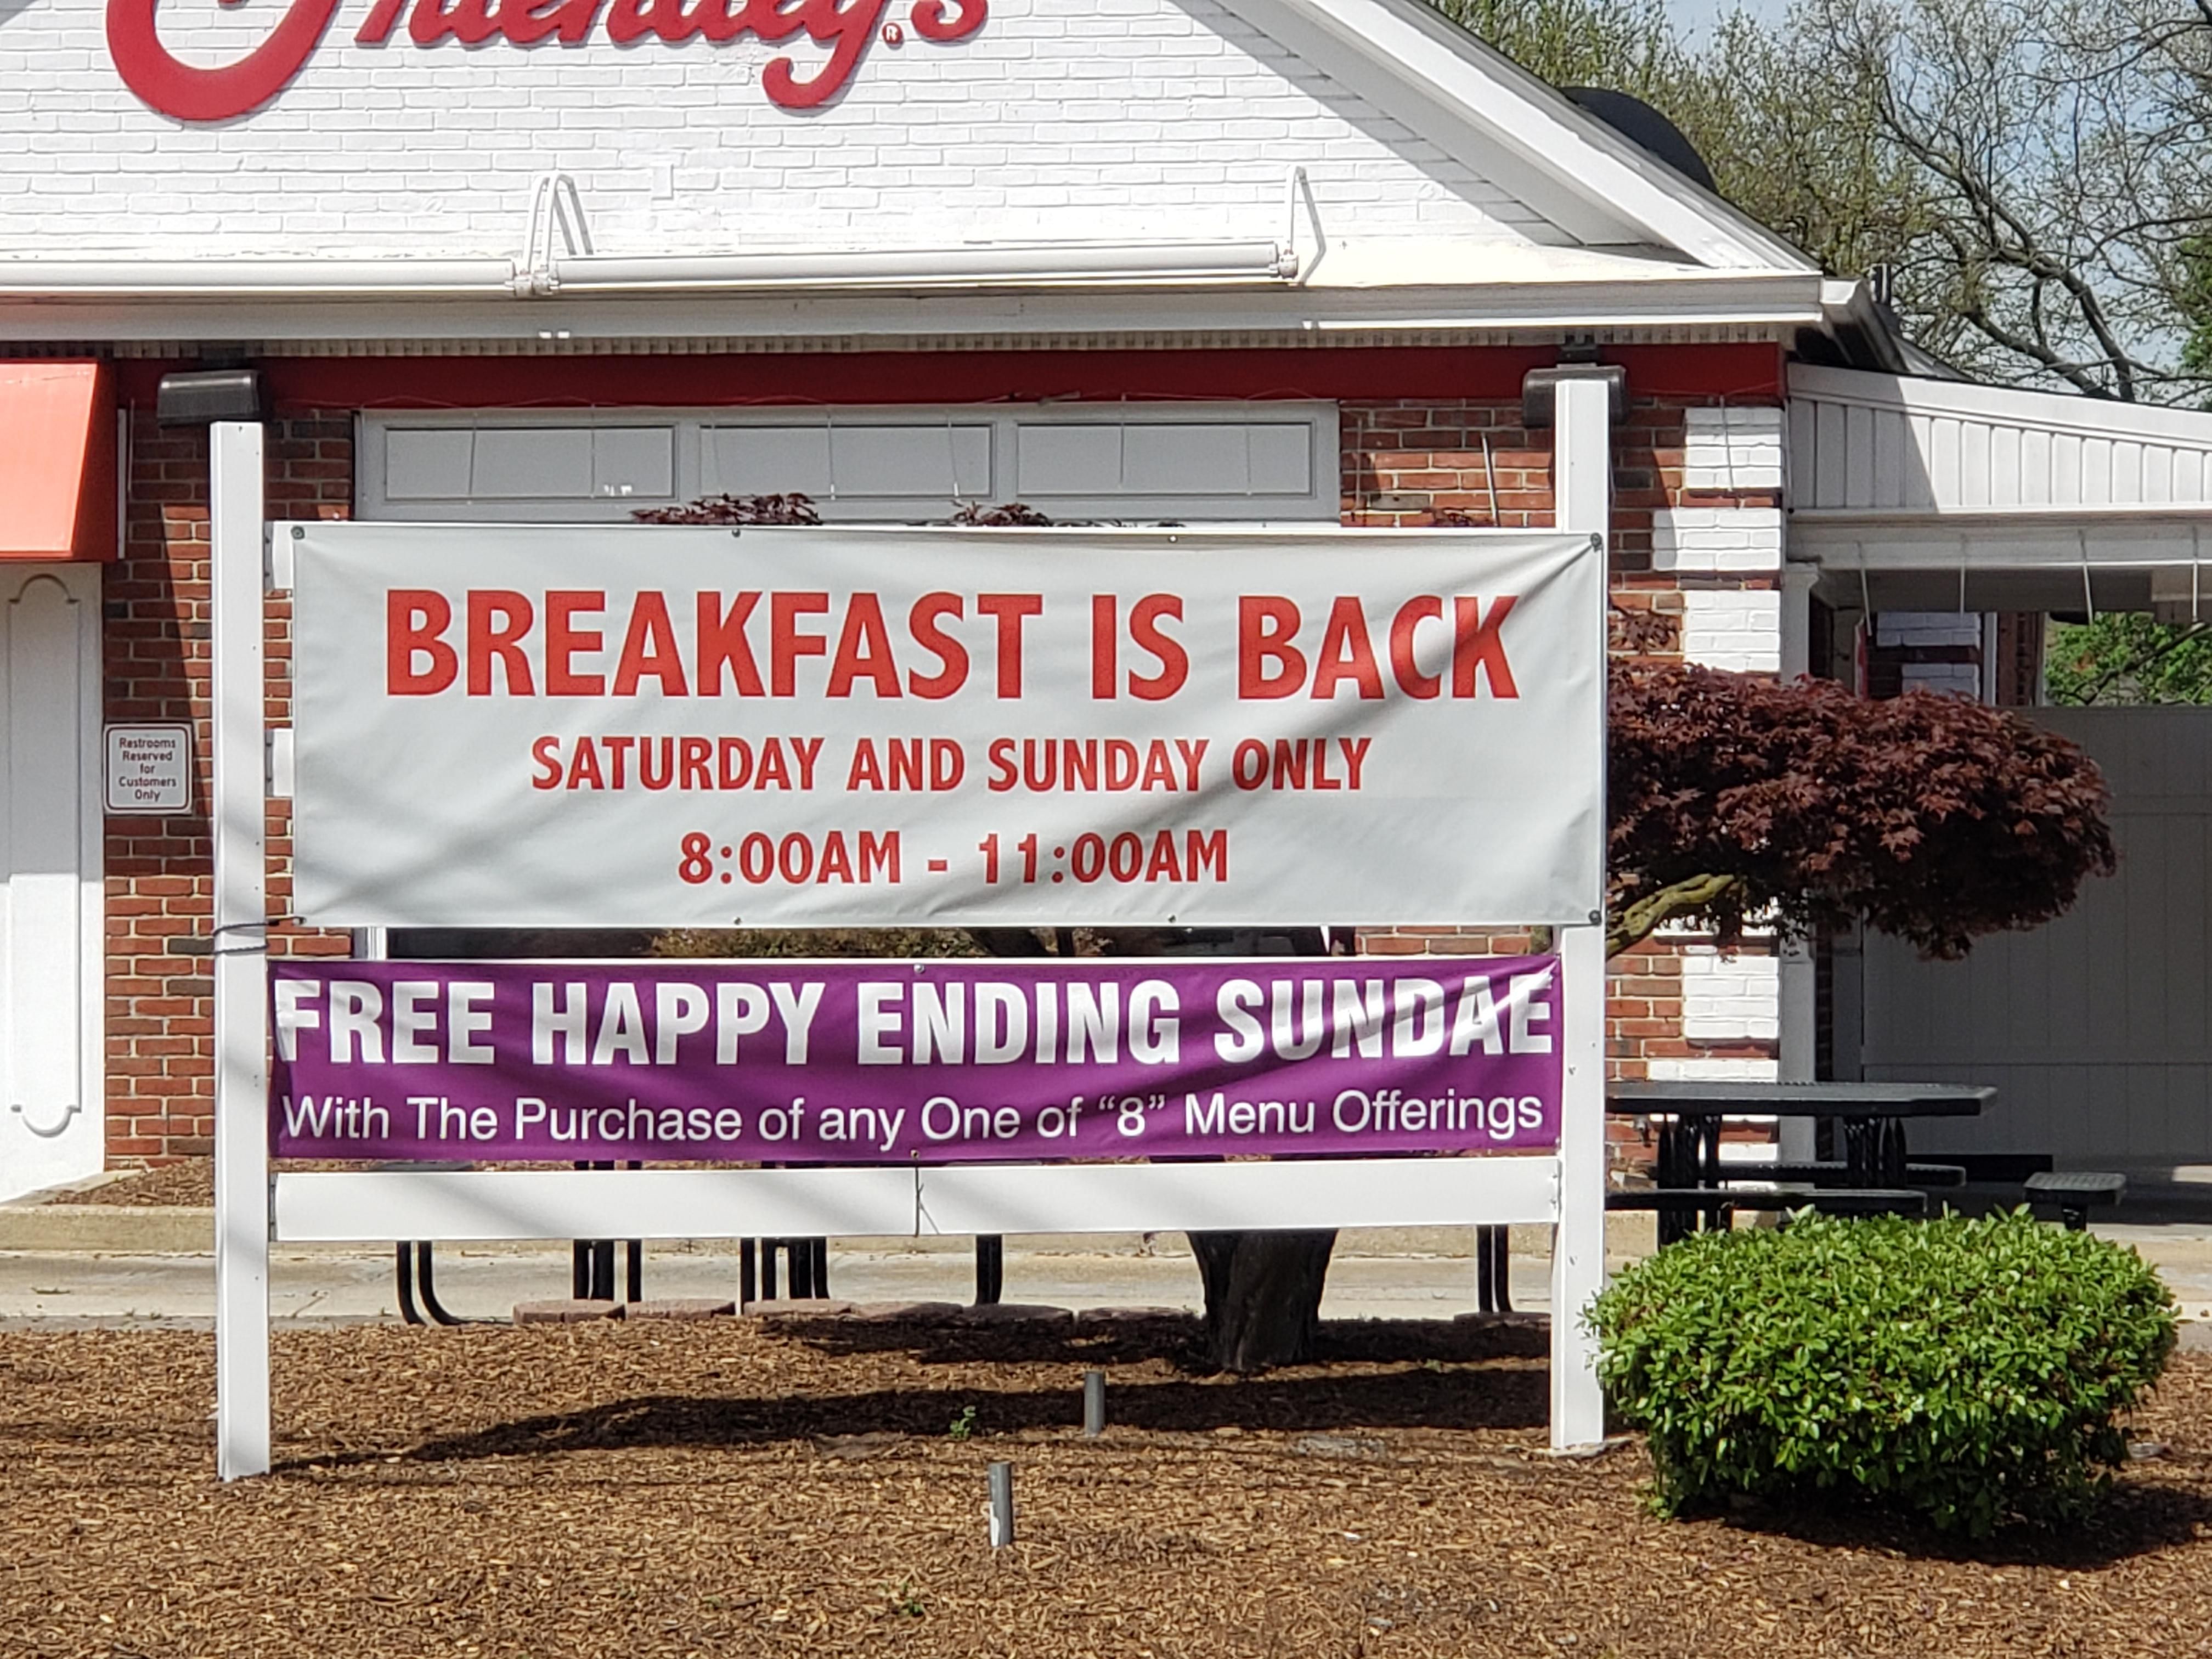 My local Friendly's looks to be getting desperate, or too Friendly.